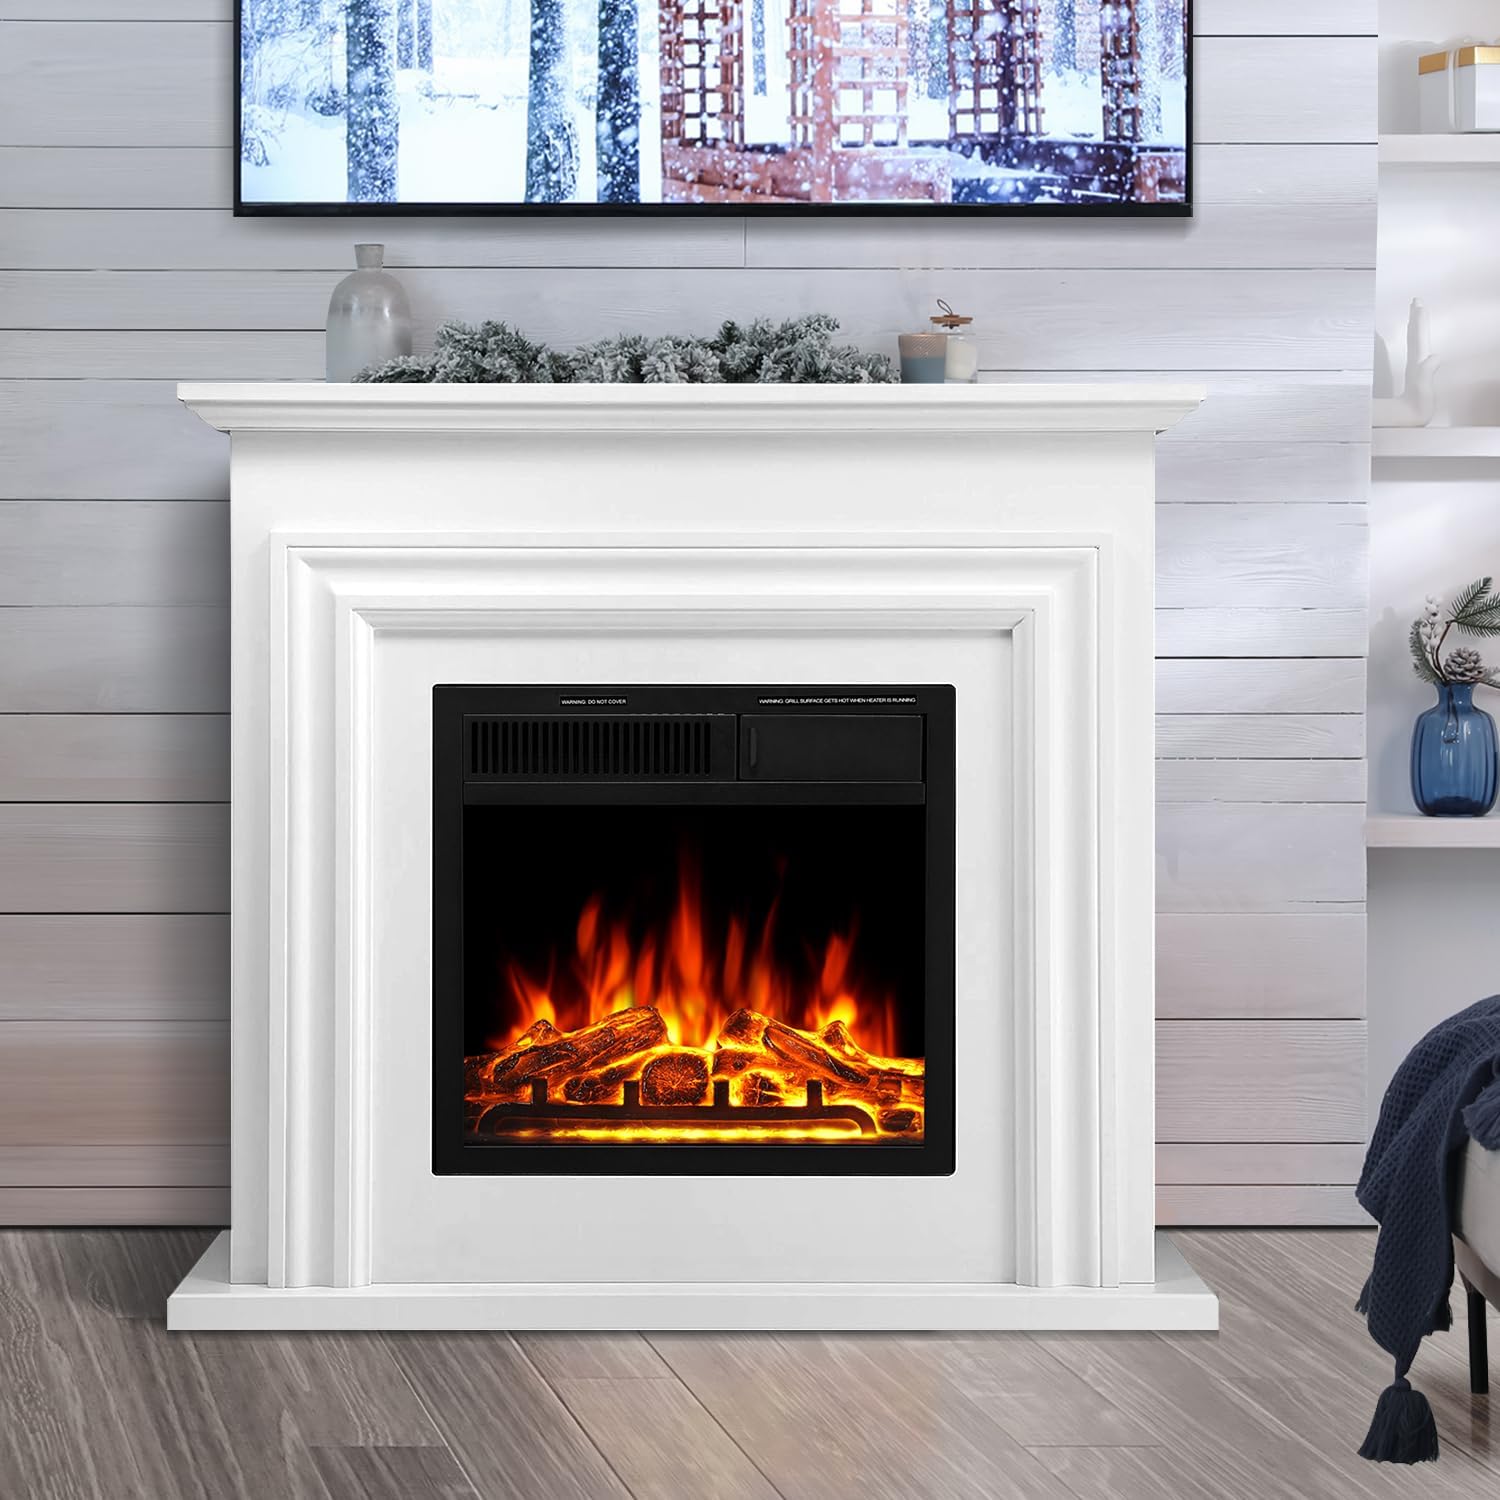 R.W.FLAME 36'' Electric Fireplace with Mantel Package,750-1500W